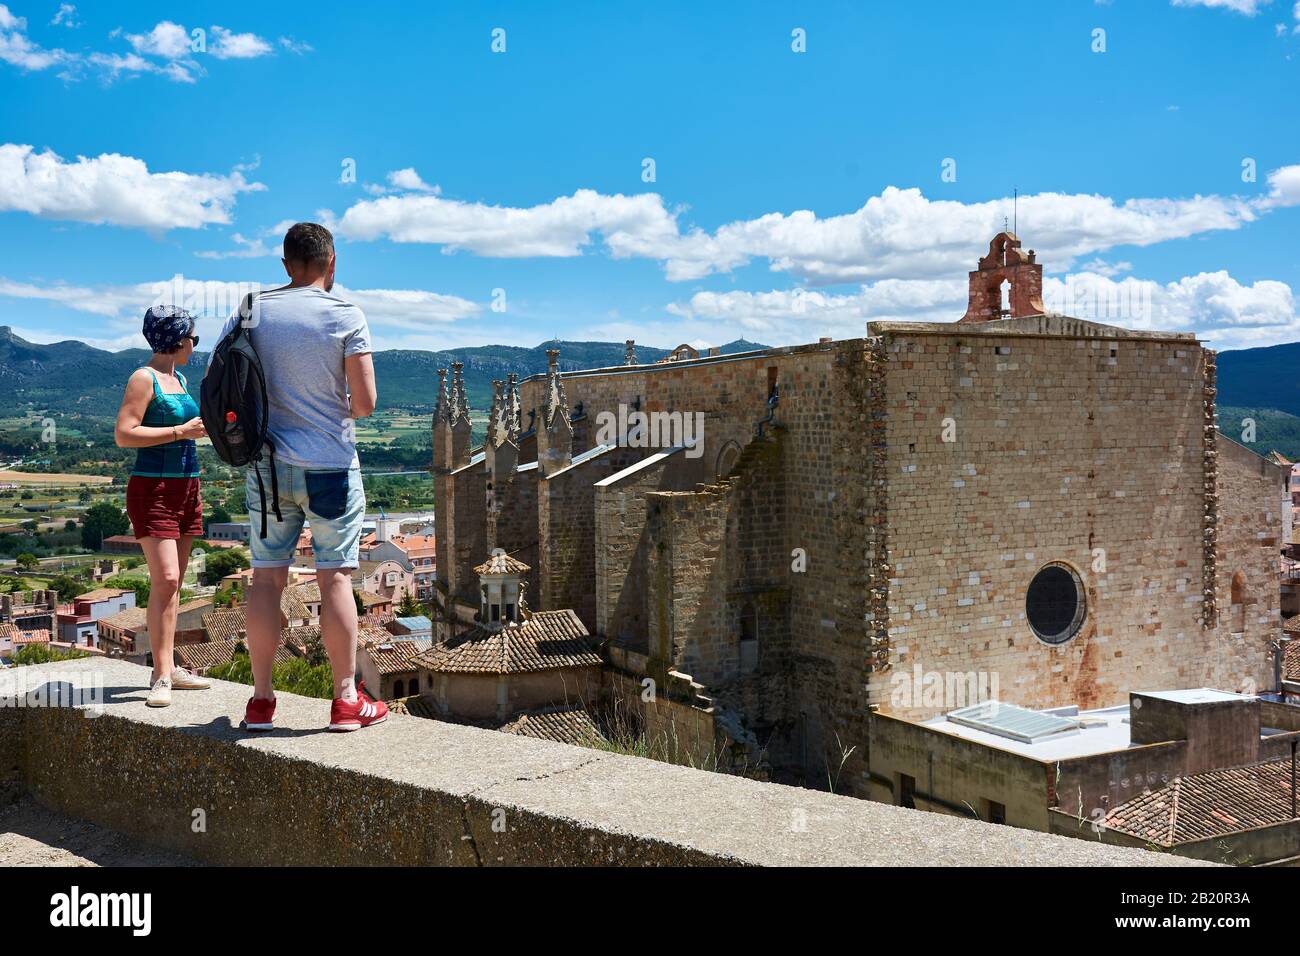 TARRAGONA, SPAIN - MAY 12, 2017: Couple standing before the romanic church of Saint Mary and amazing landscape of mountains in the medieval city of Mo Stock Photo